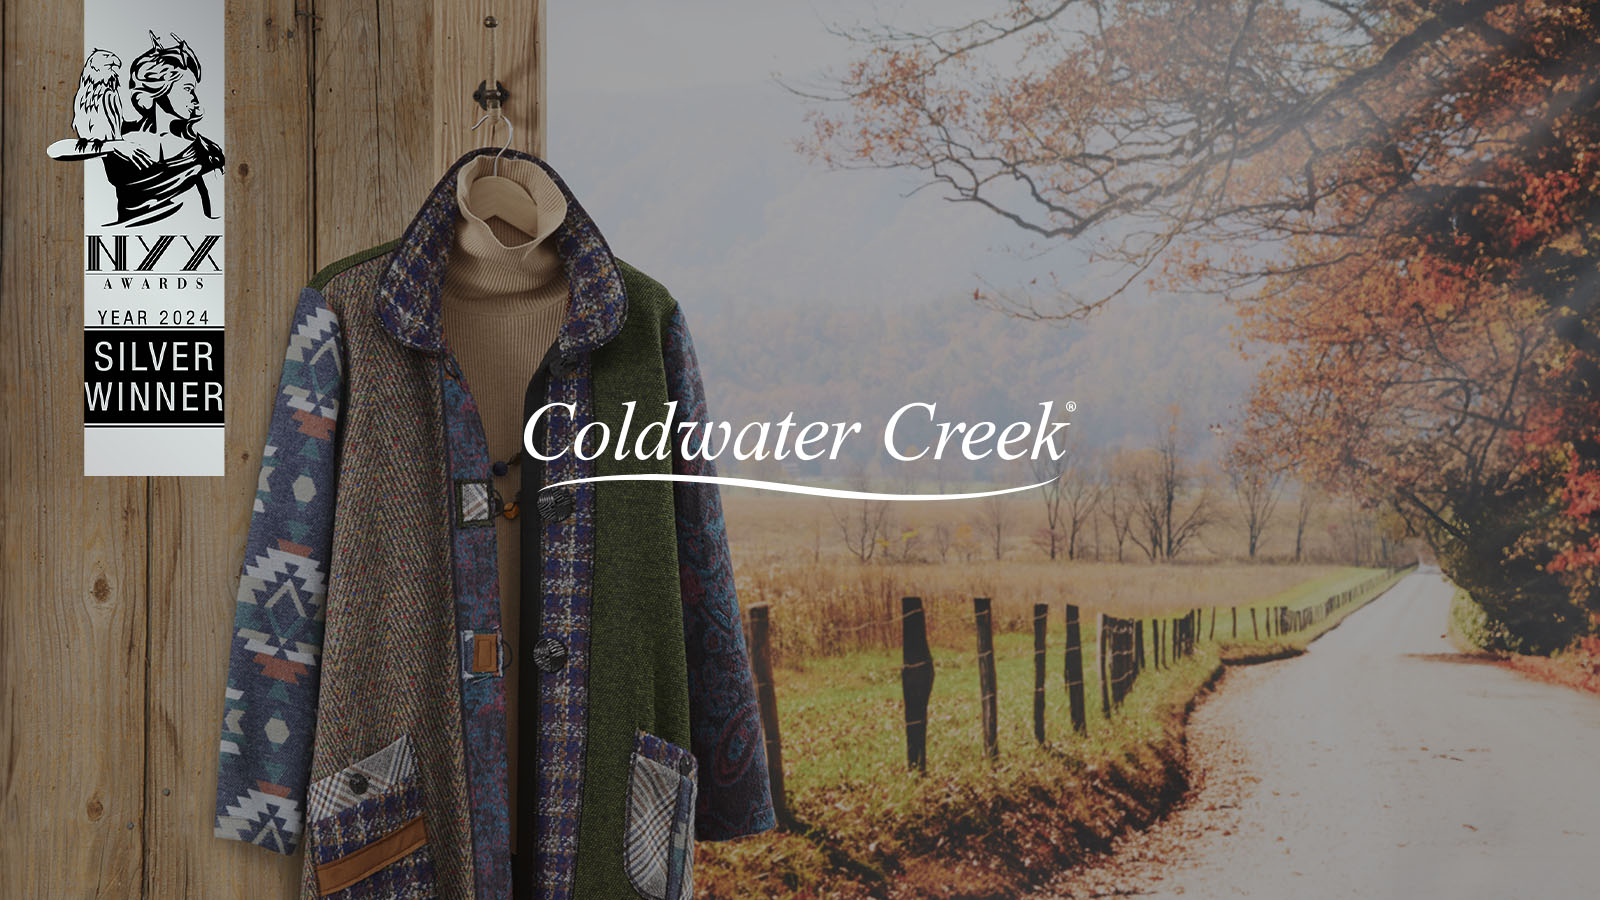 Coldwater Creek wins Silver NYX Award